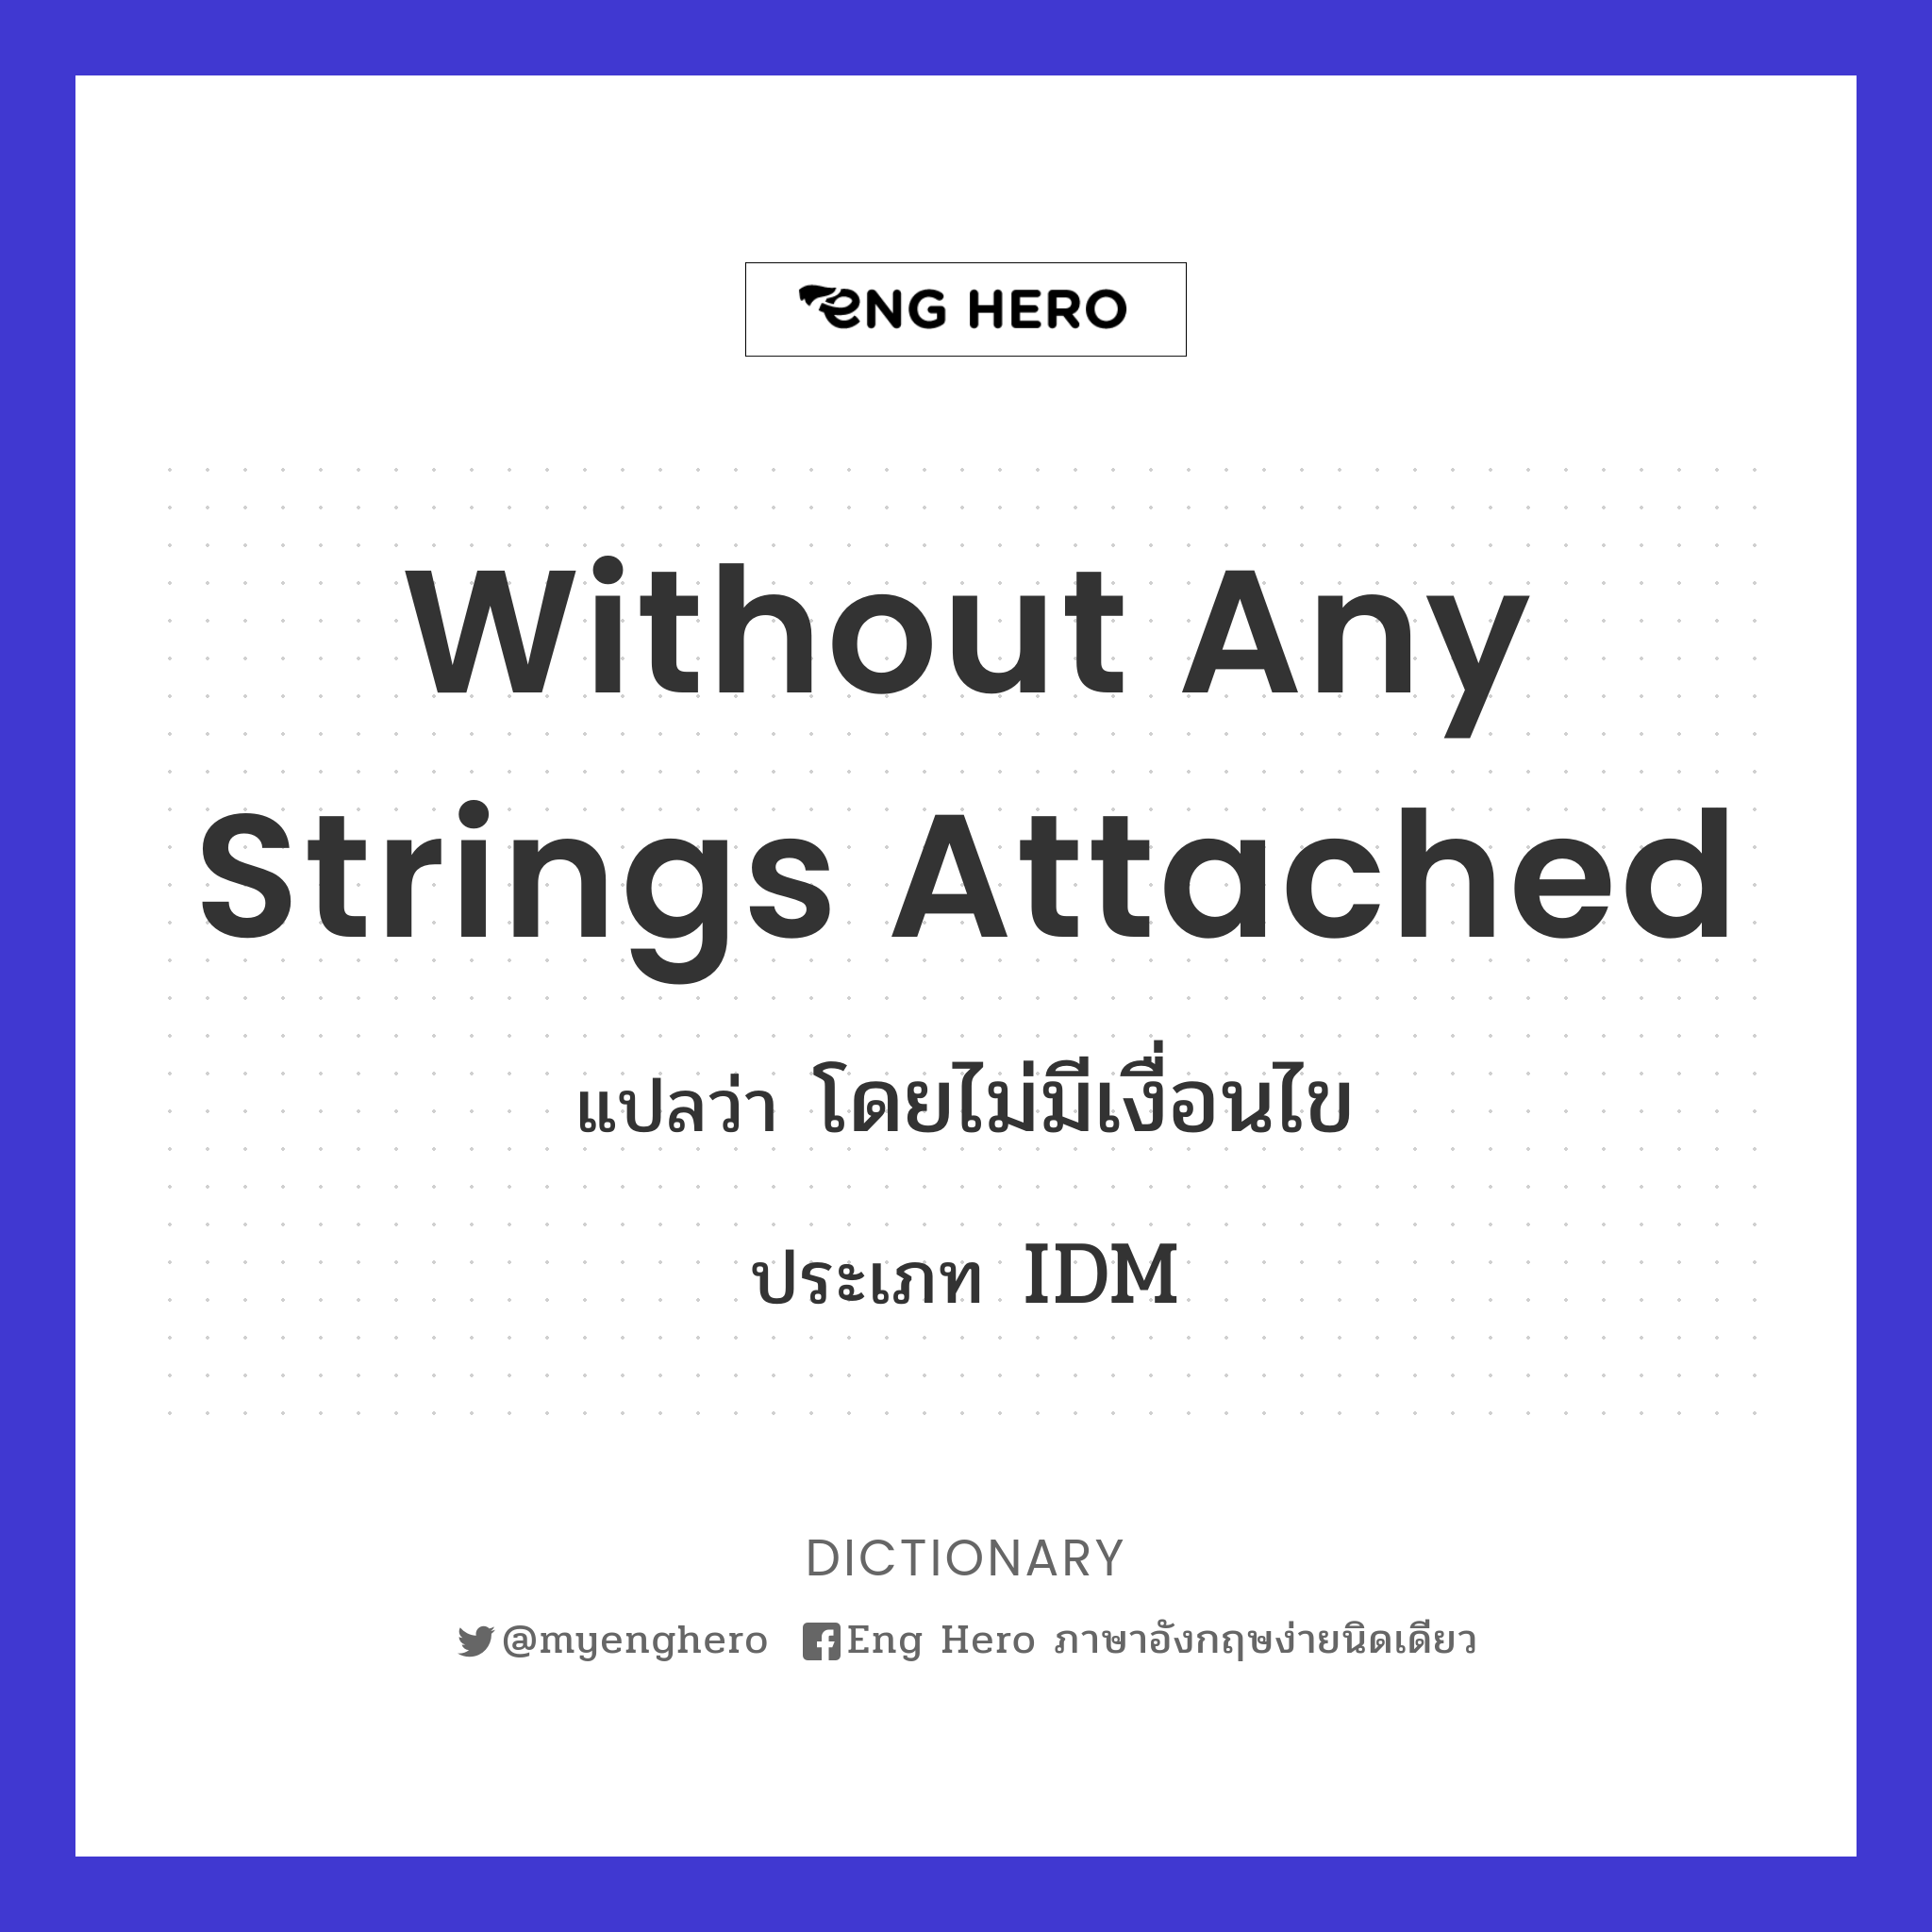 without any strings attached